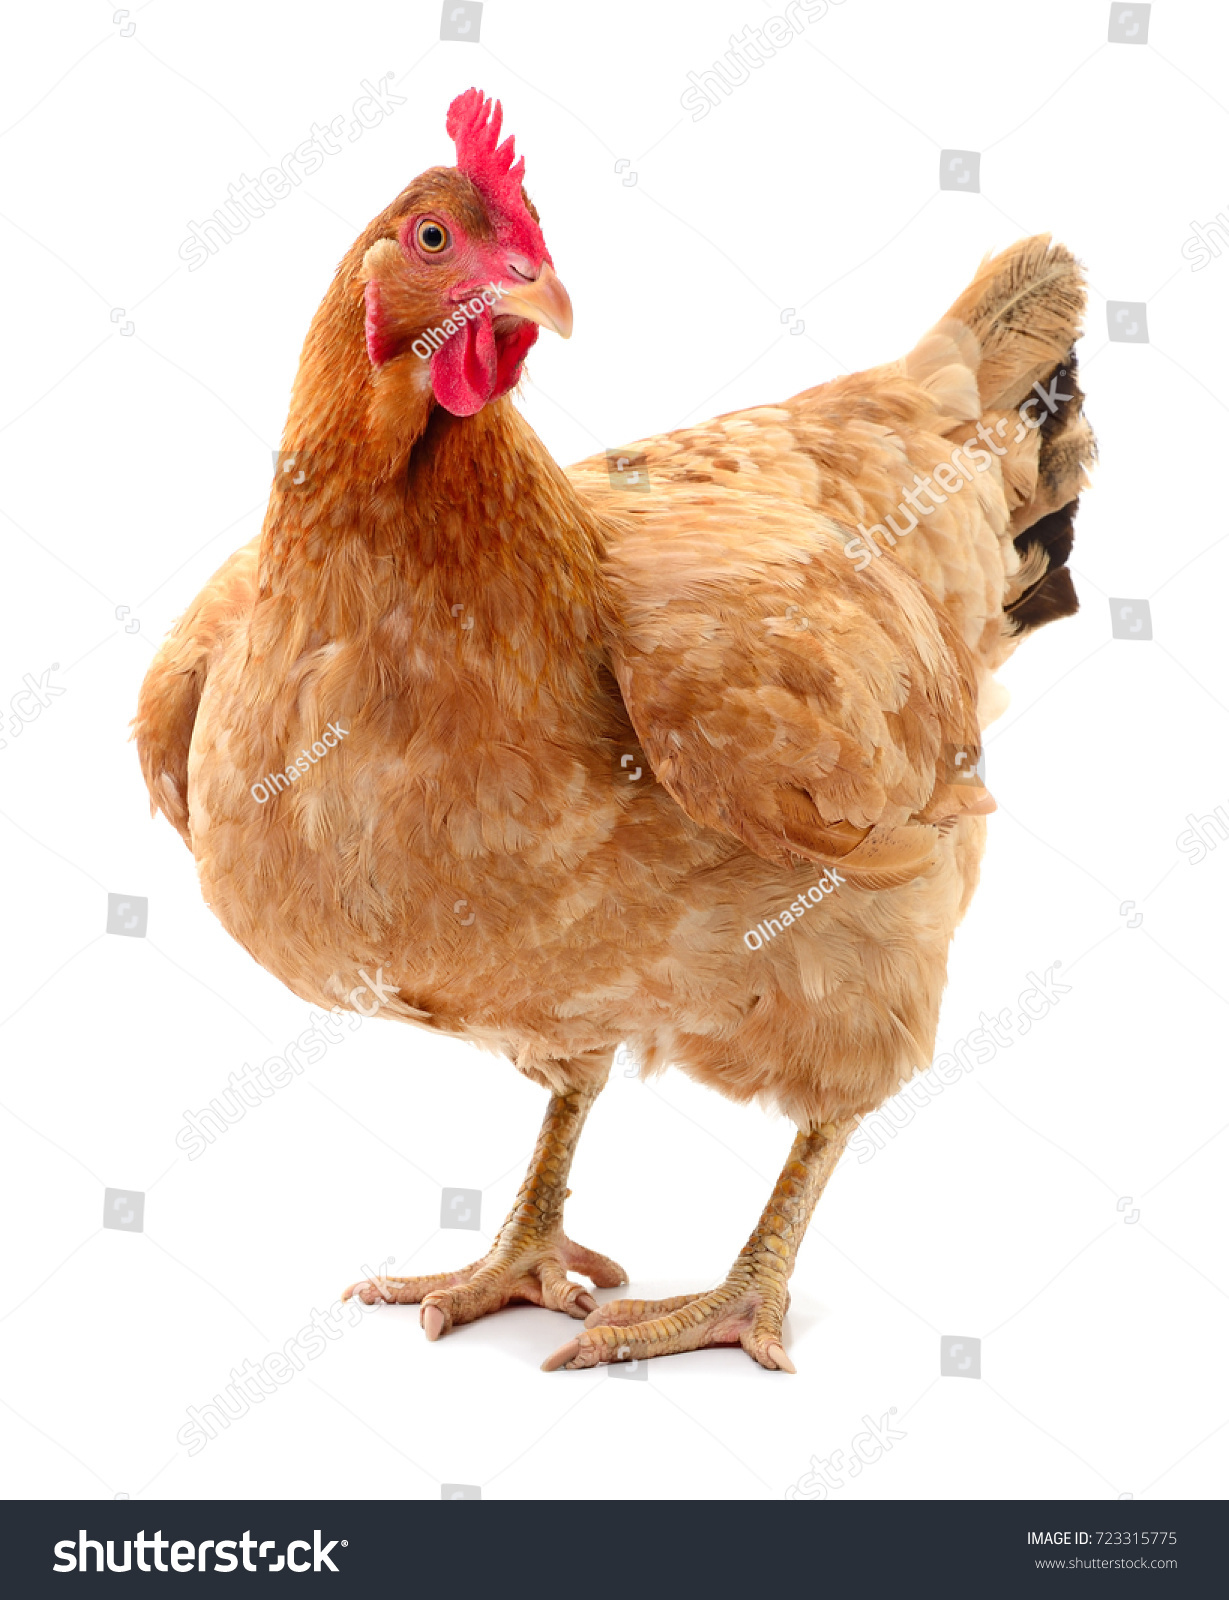 Young brown hen isolated on white background. #723315775